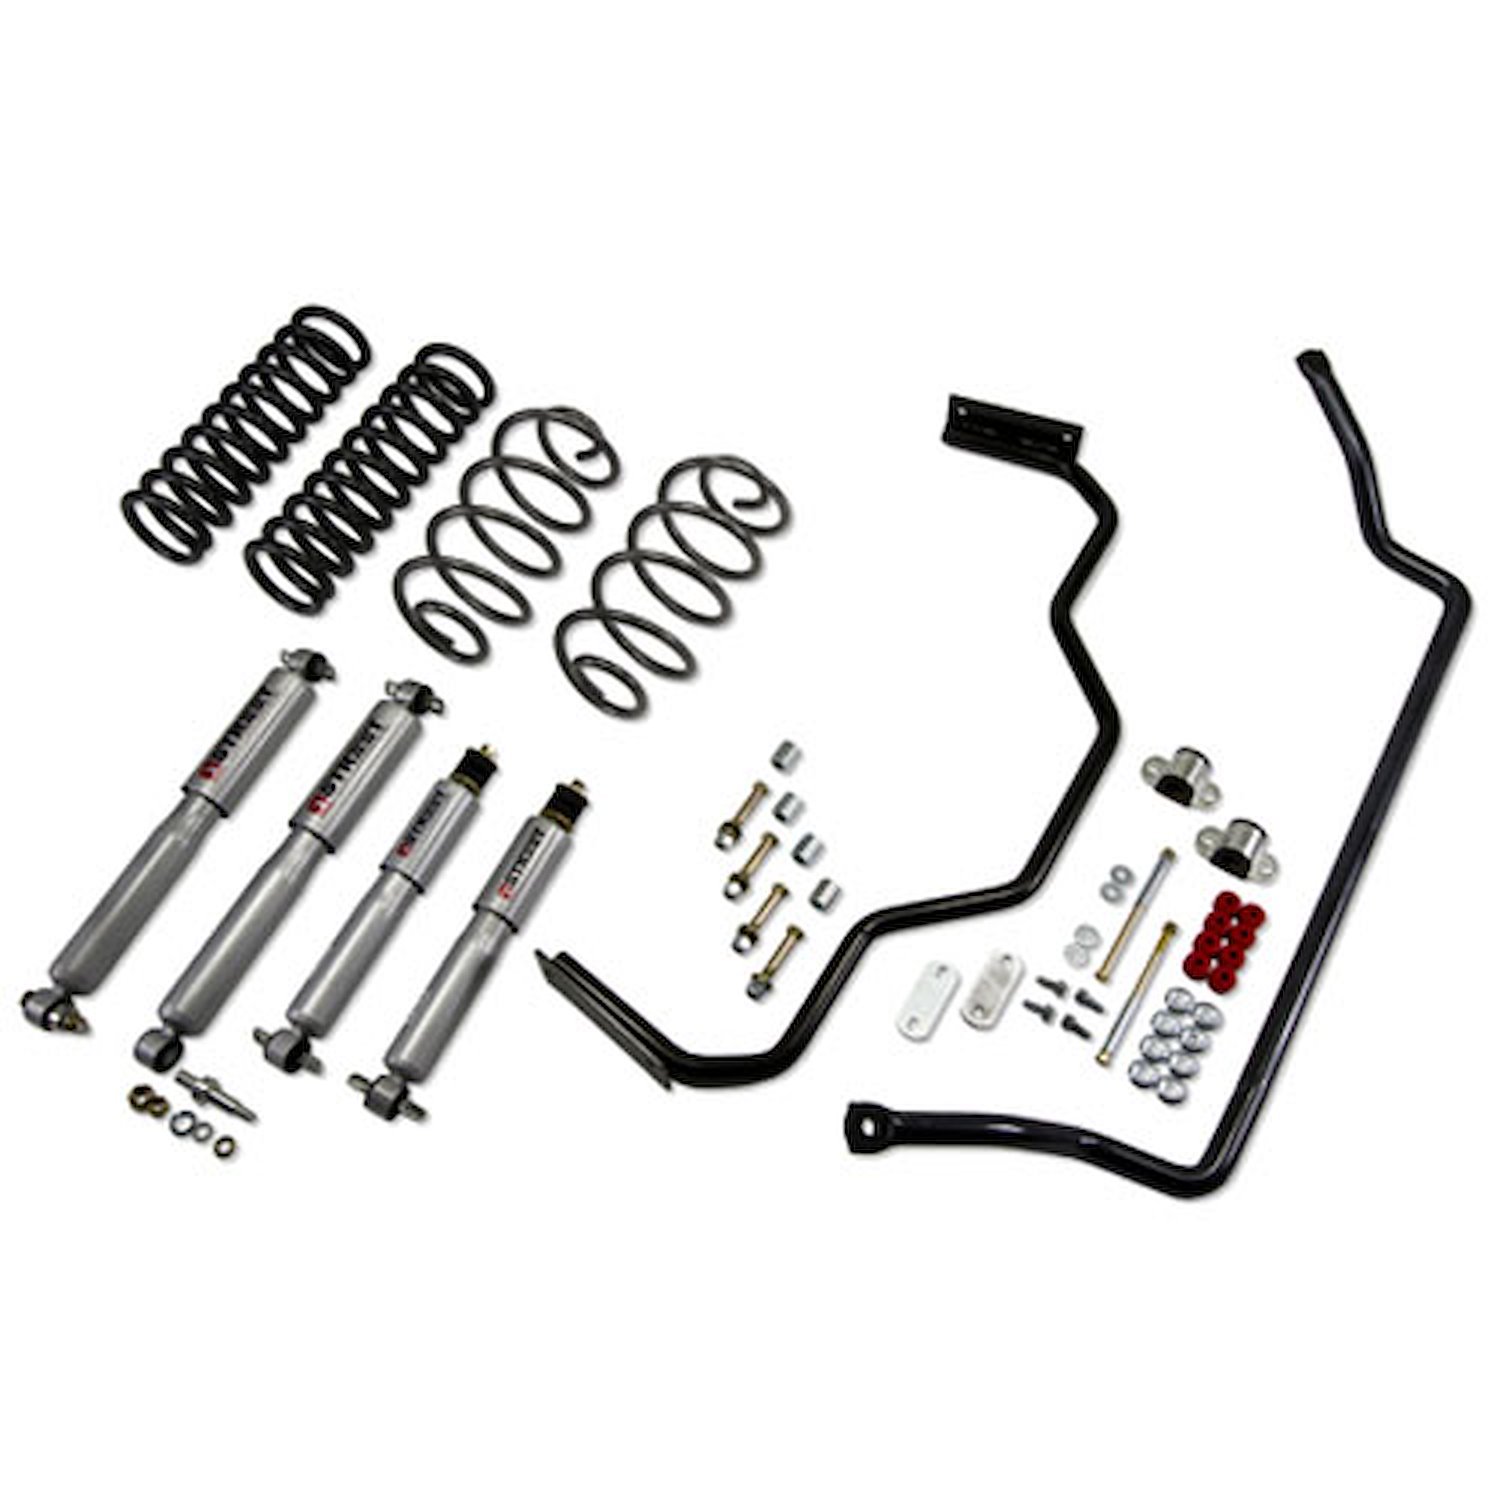 Muscle Car Suspension Kit for 1967 GM A-Body